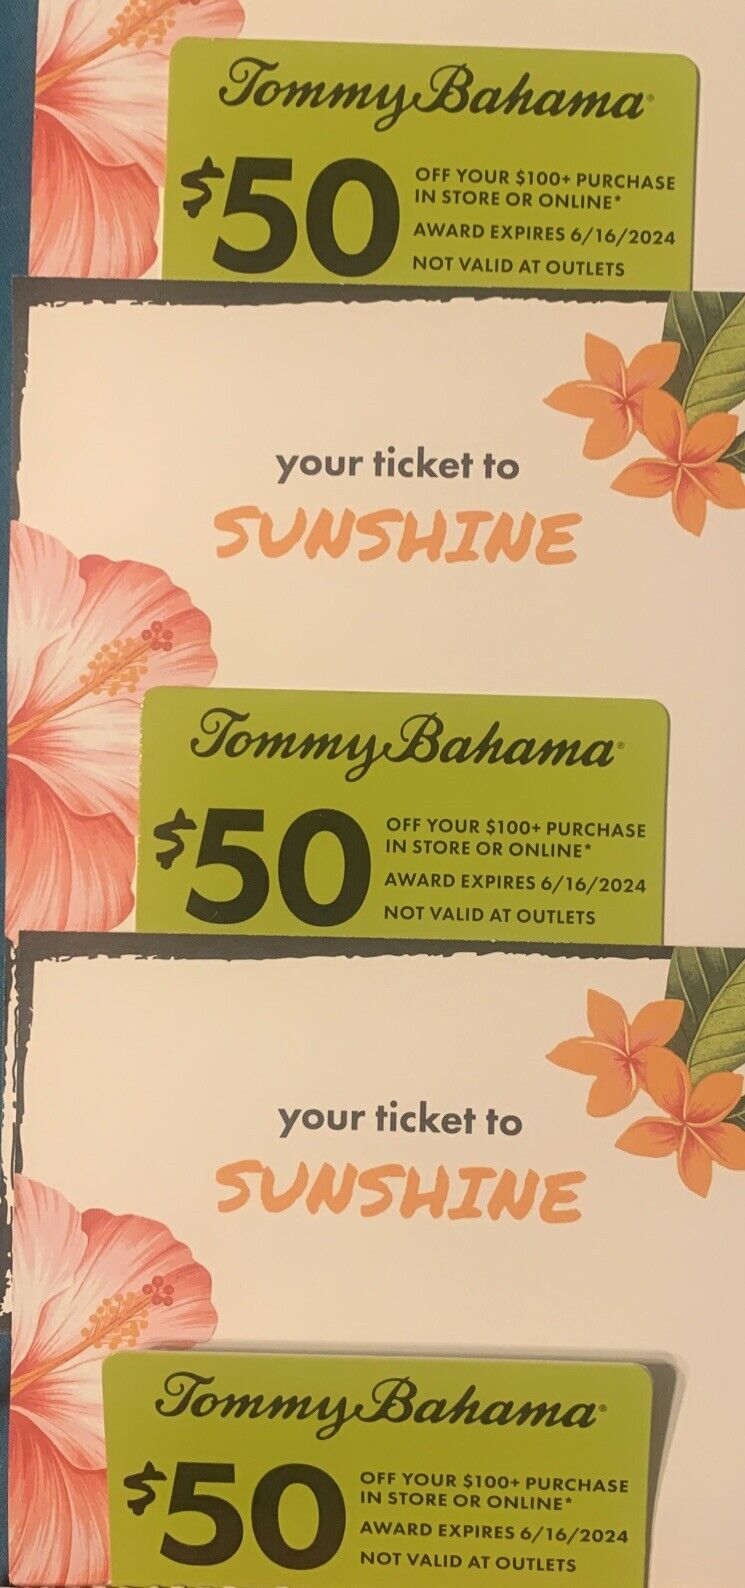 TommyBahama Coupon 50 Off In 100 Purchase In Store & Online Jun 16 Tommy Bahama